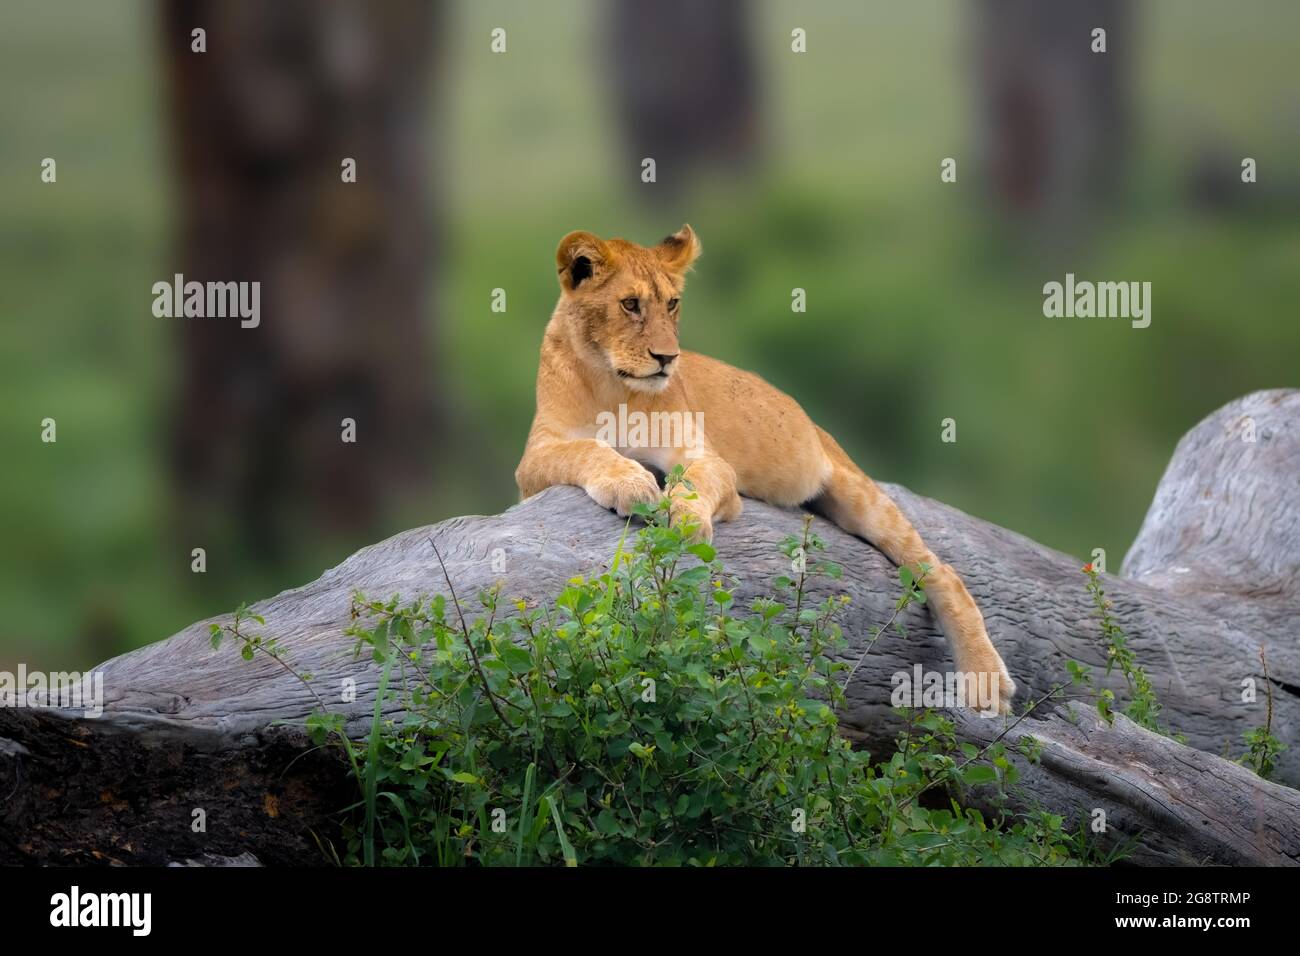 Photo of Lion cub with selective focus on the lion on the tree Stock Photo